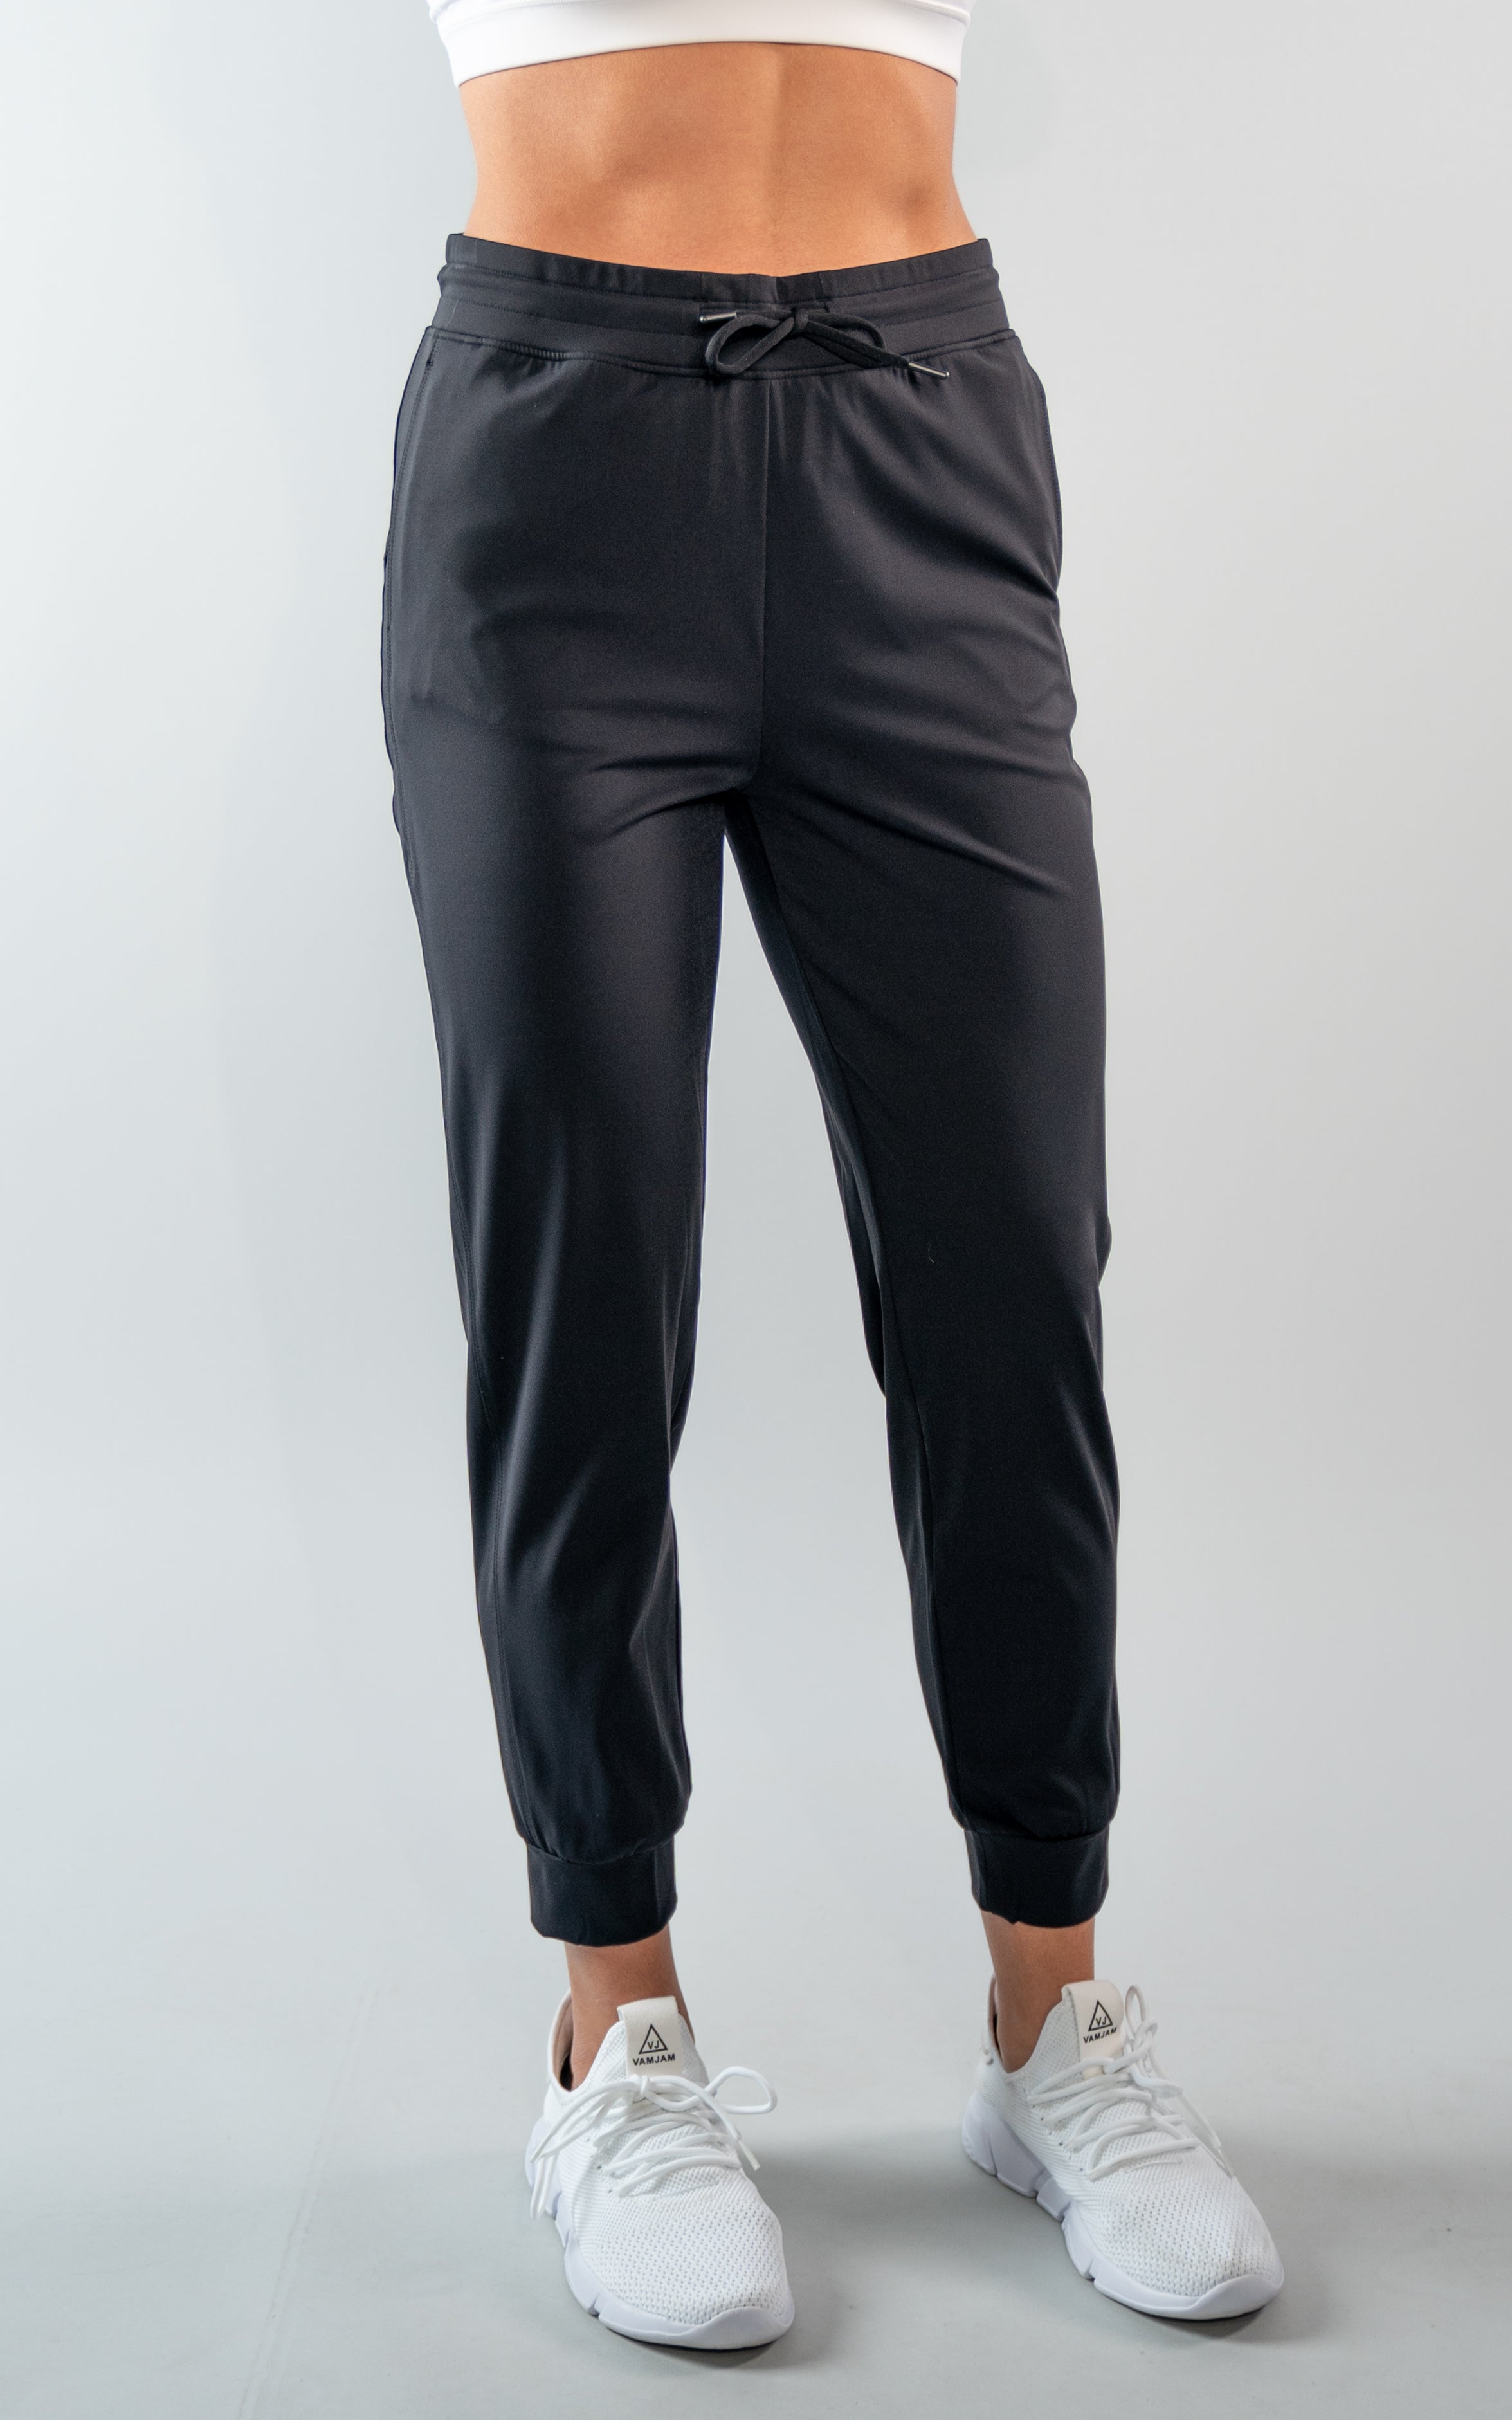 Women's Joggers  Southern Athletica